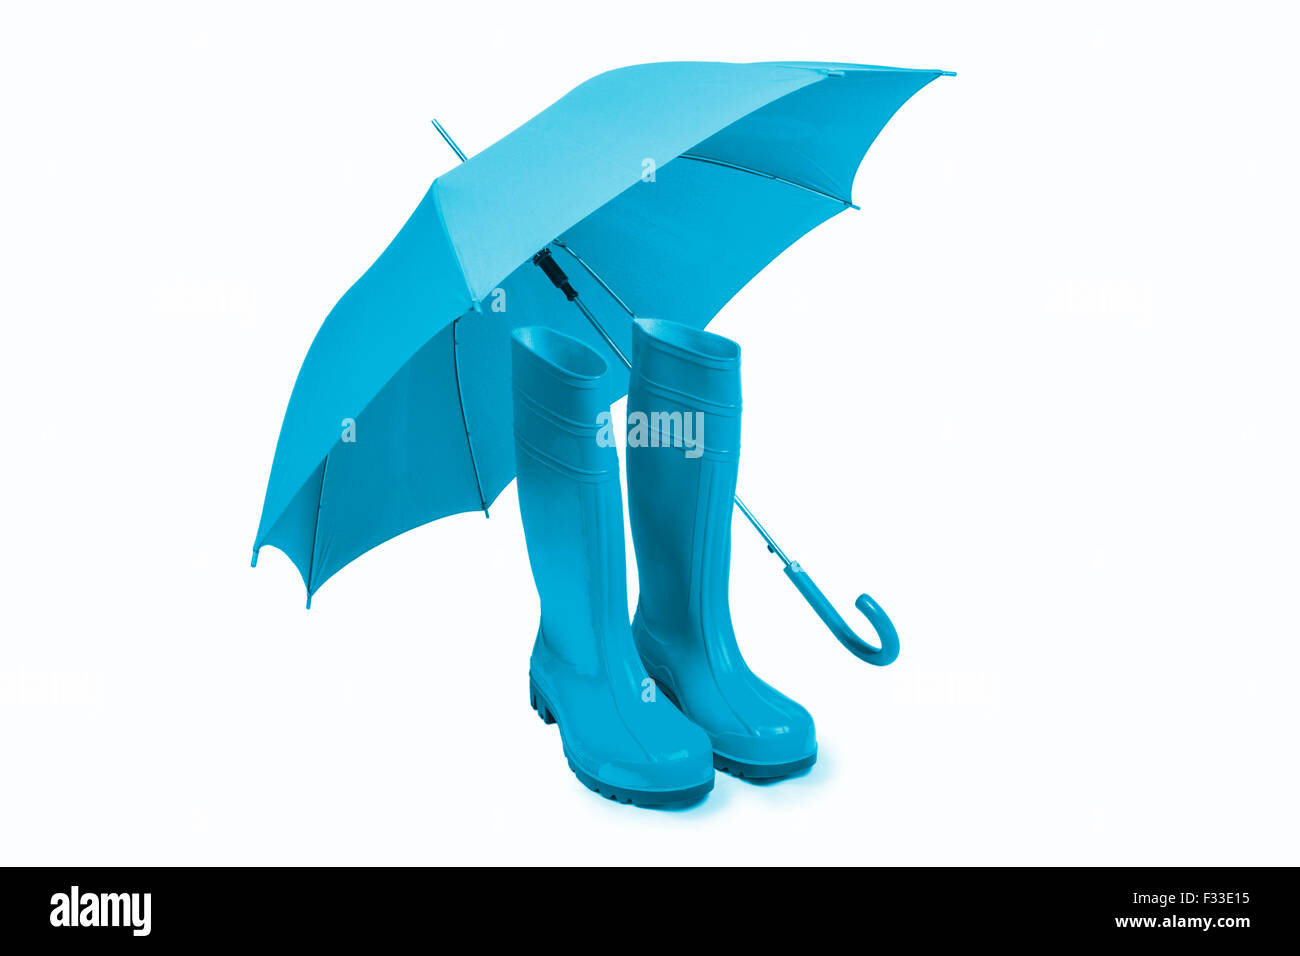 Blue rubber boots and umbrella isolated Stock Photo